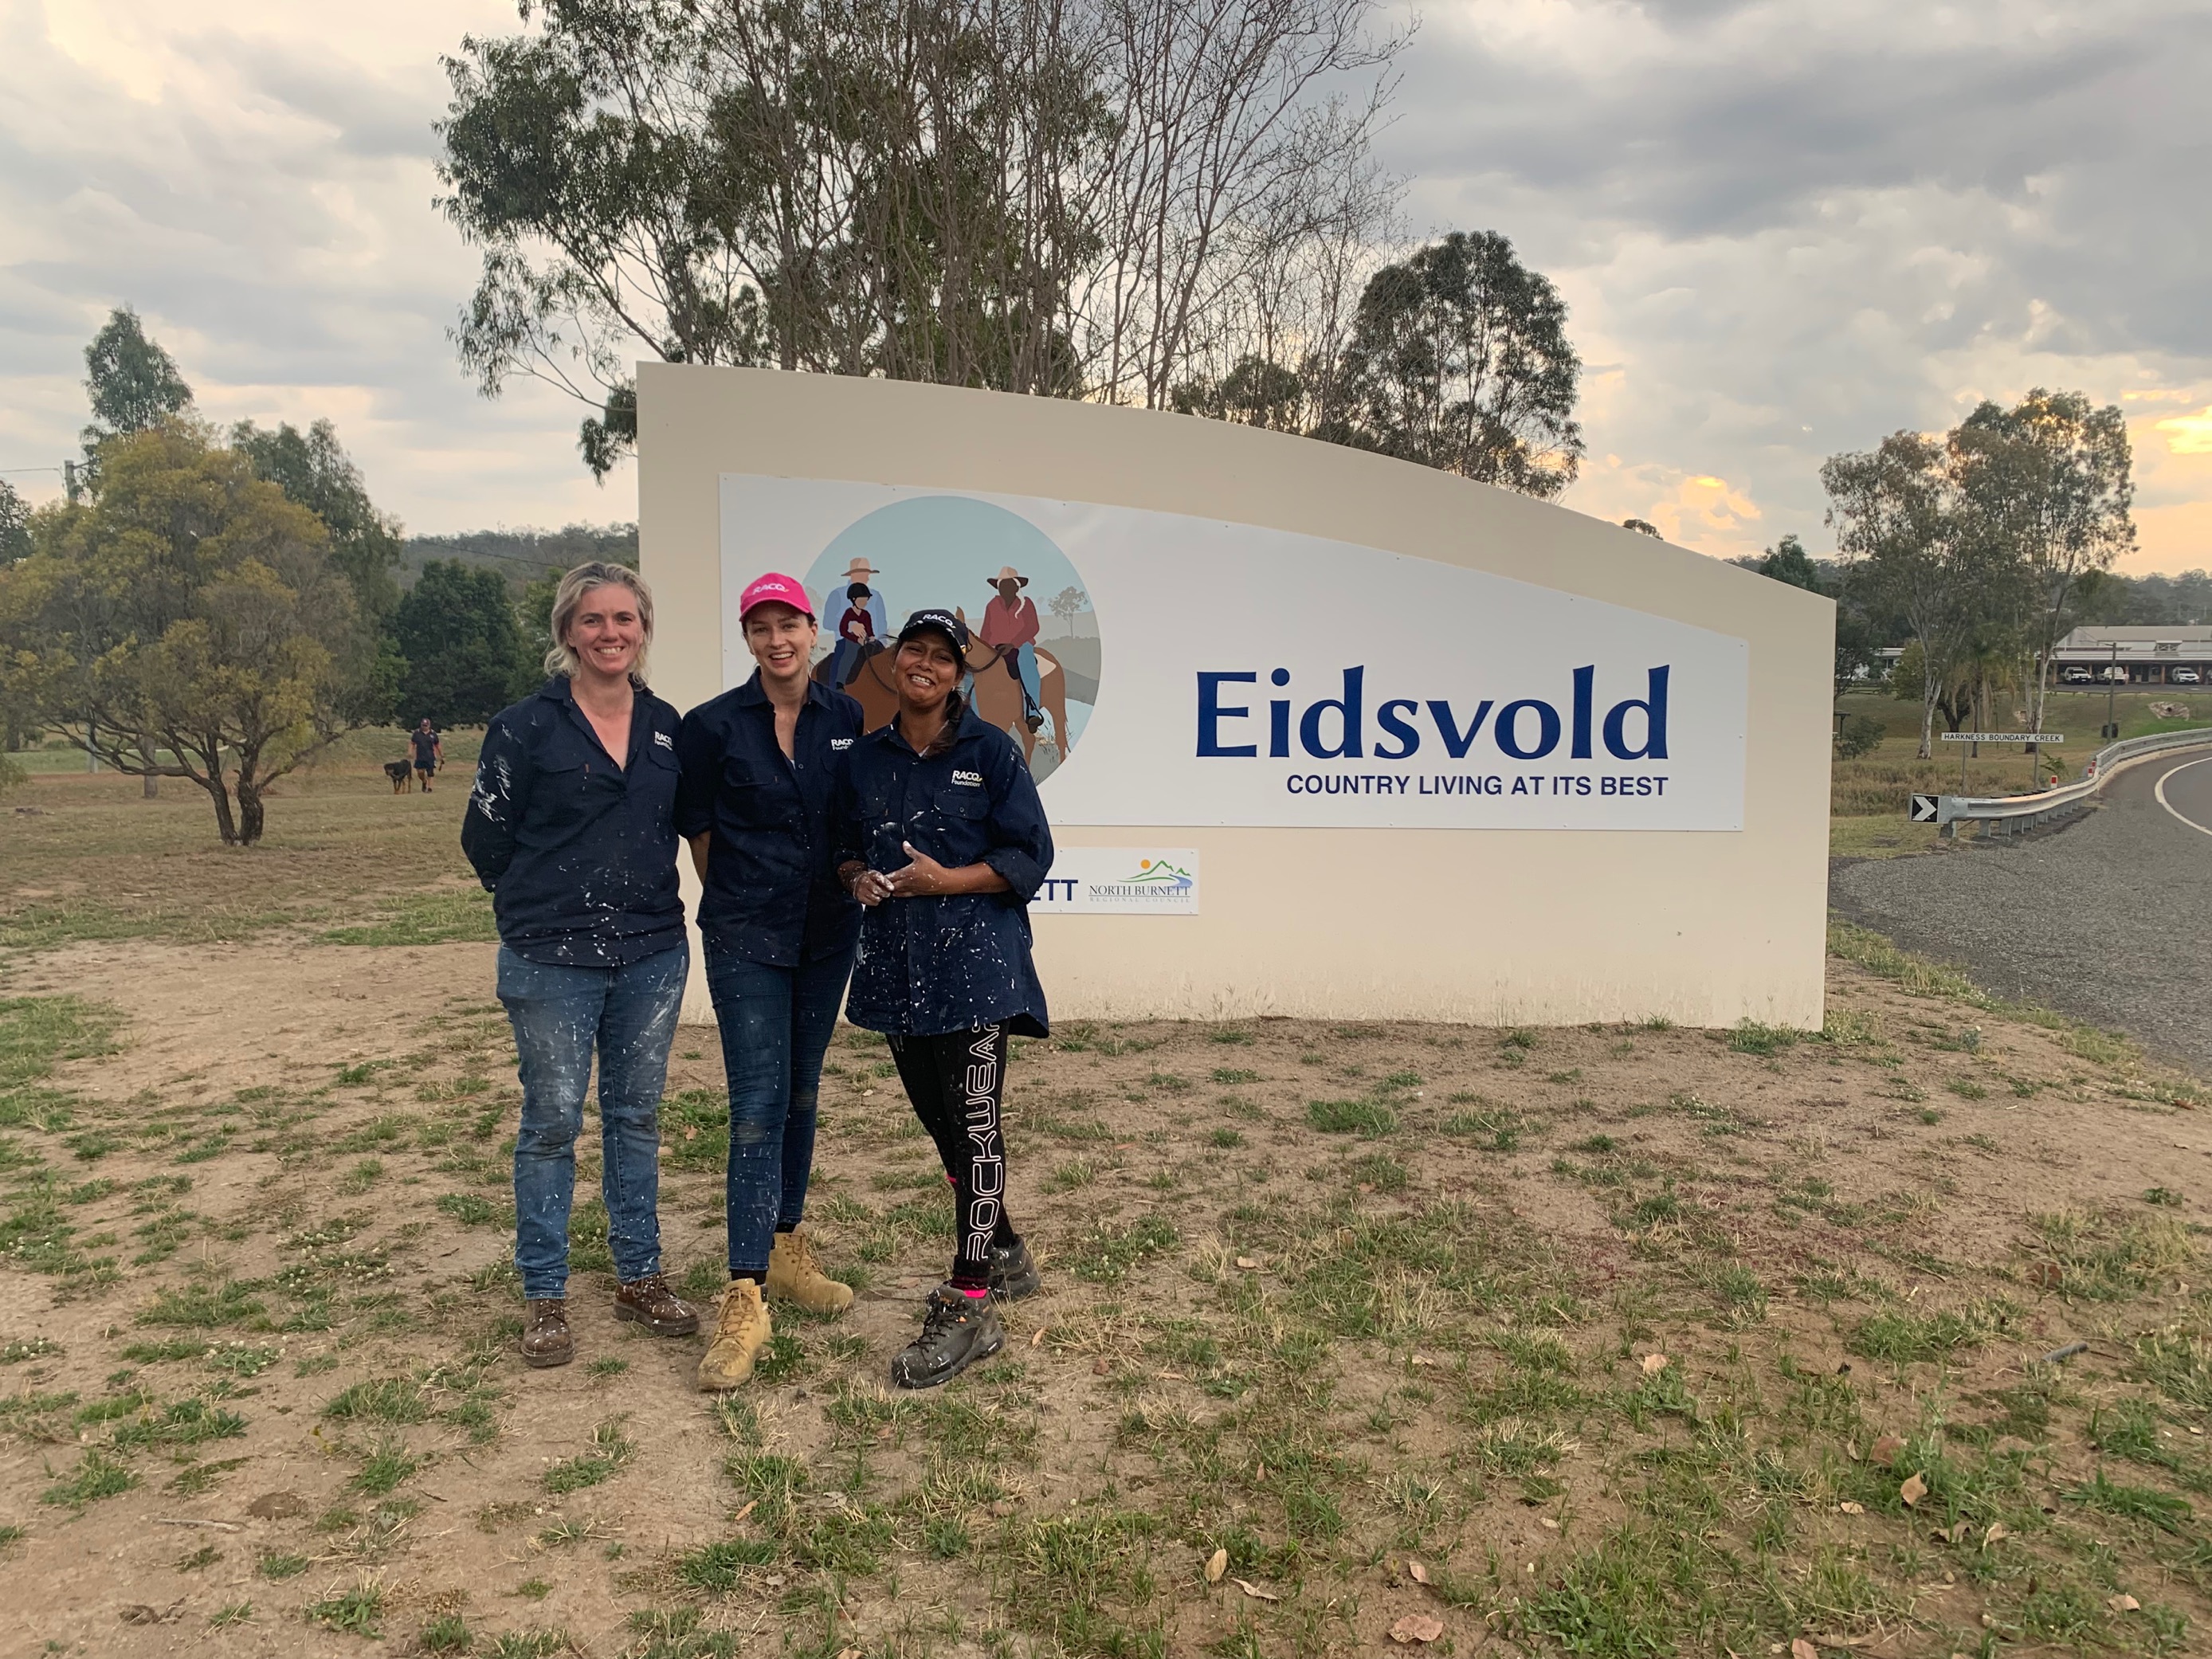 Foundation volunteers in front of Eidsfold sign